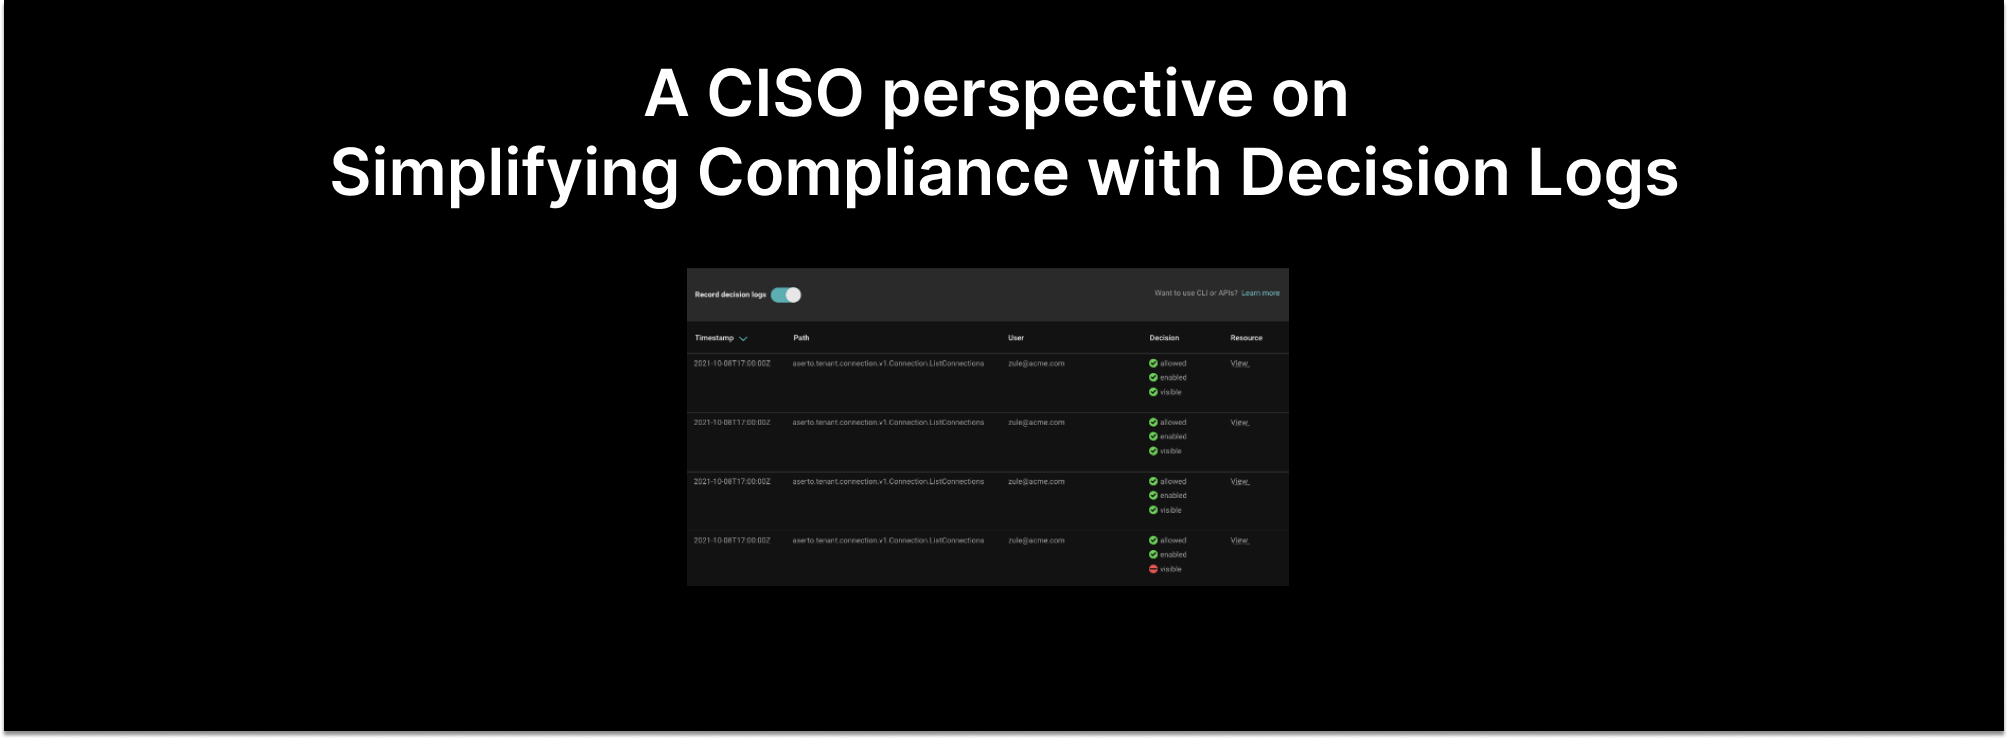 A CISO perspective on Authorization Decision Logs